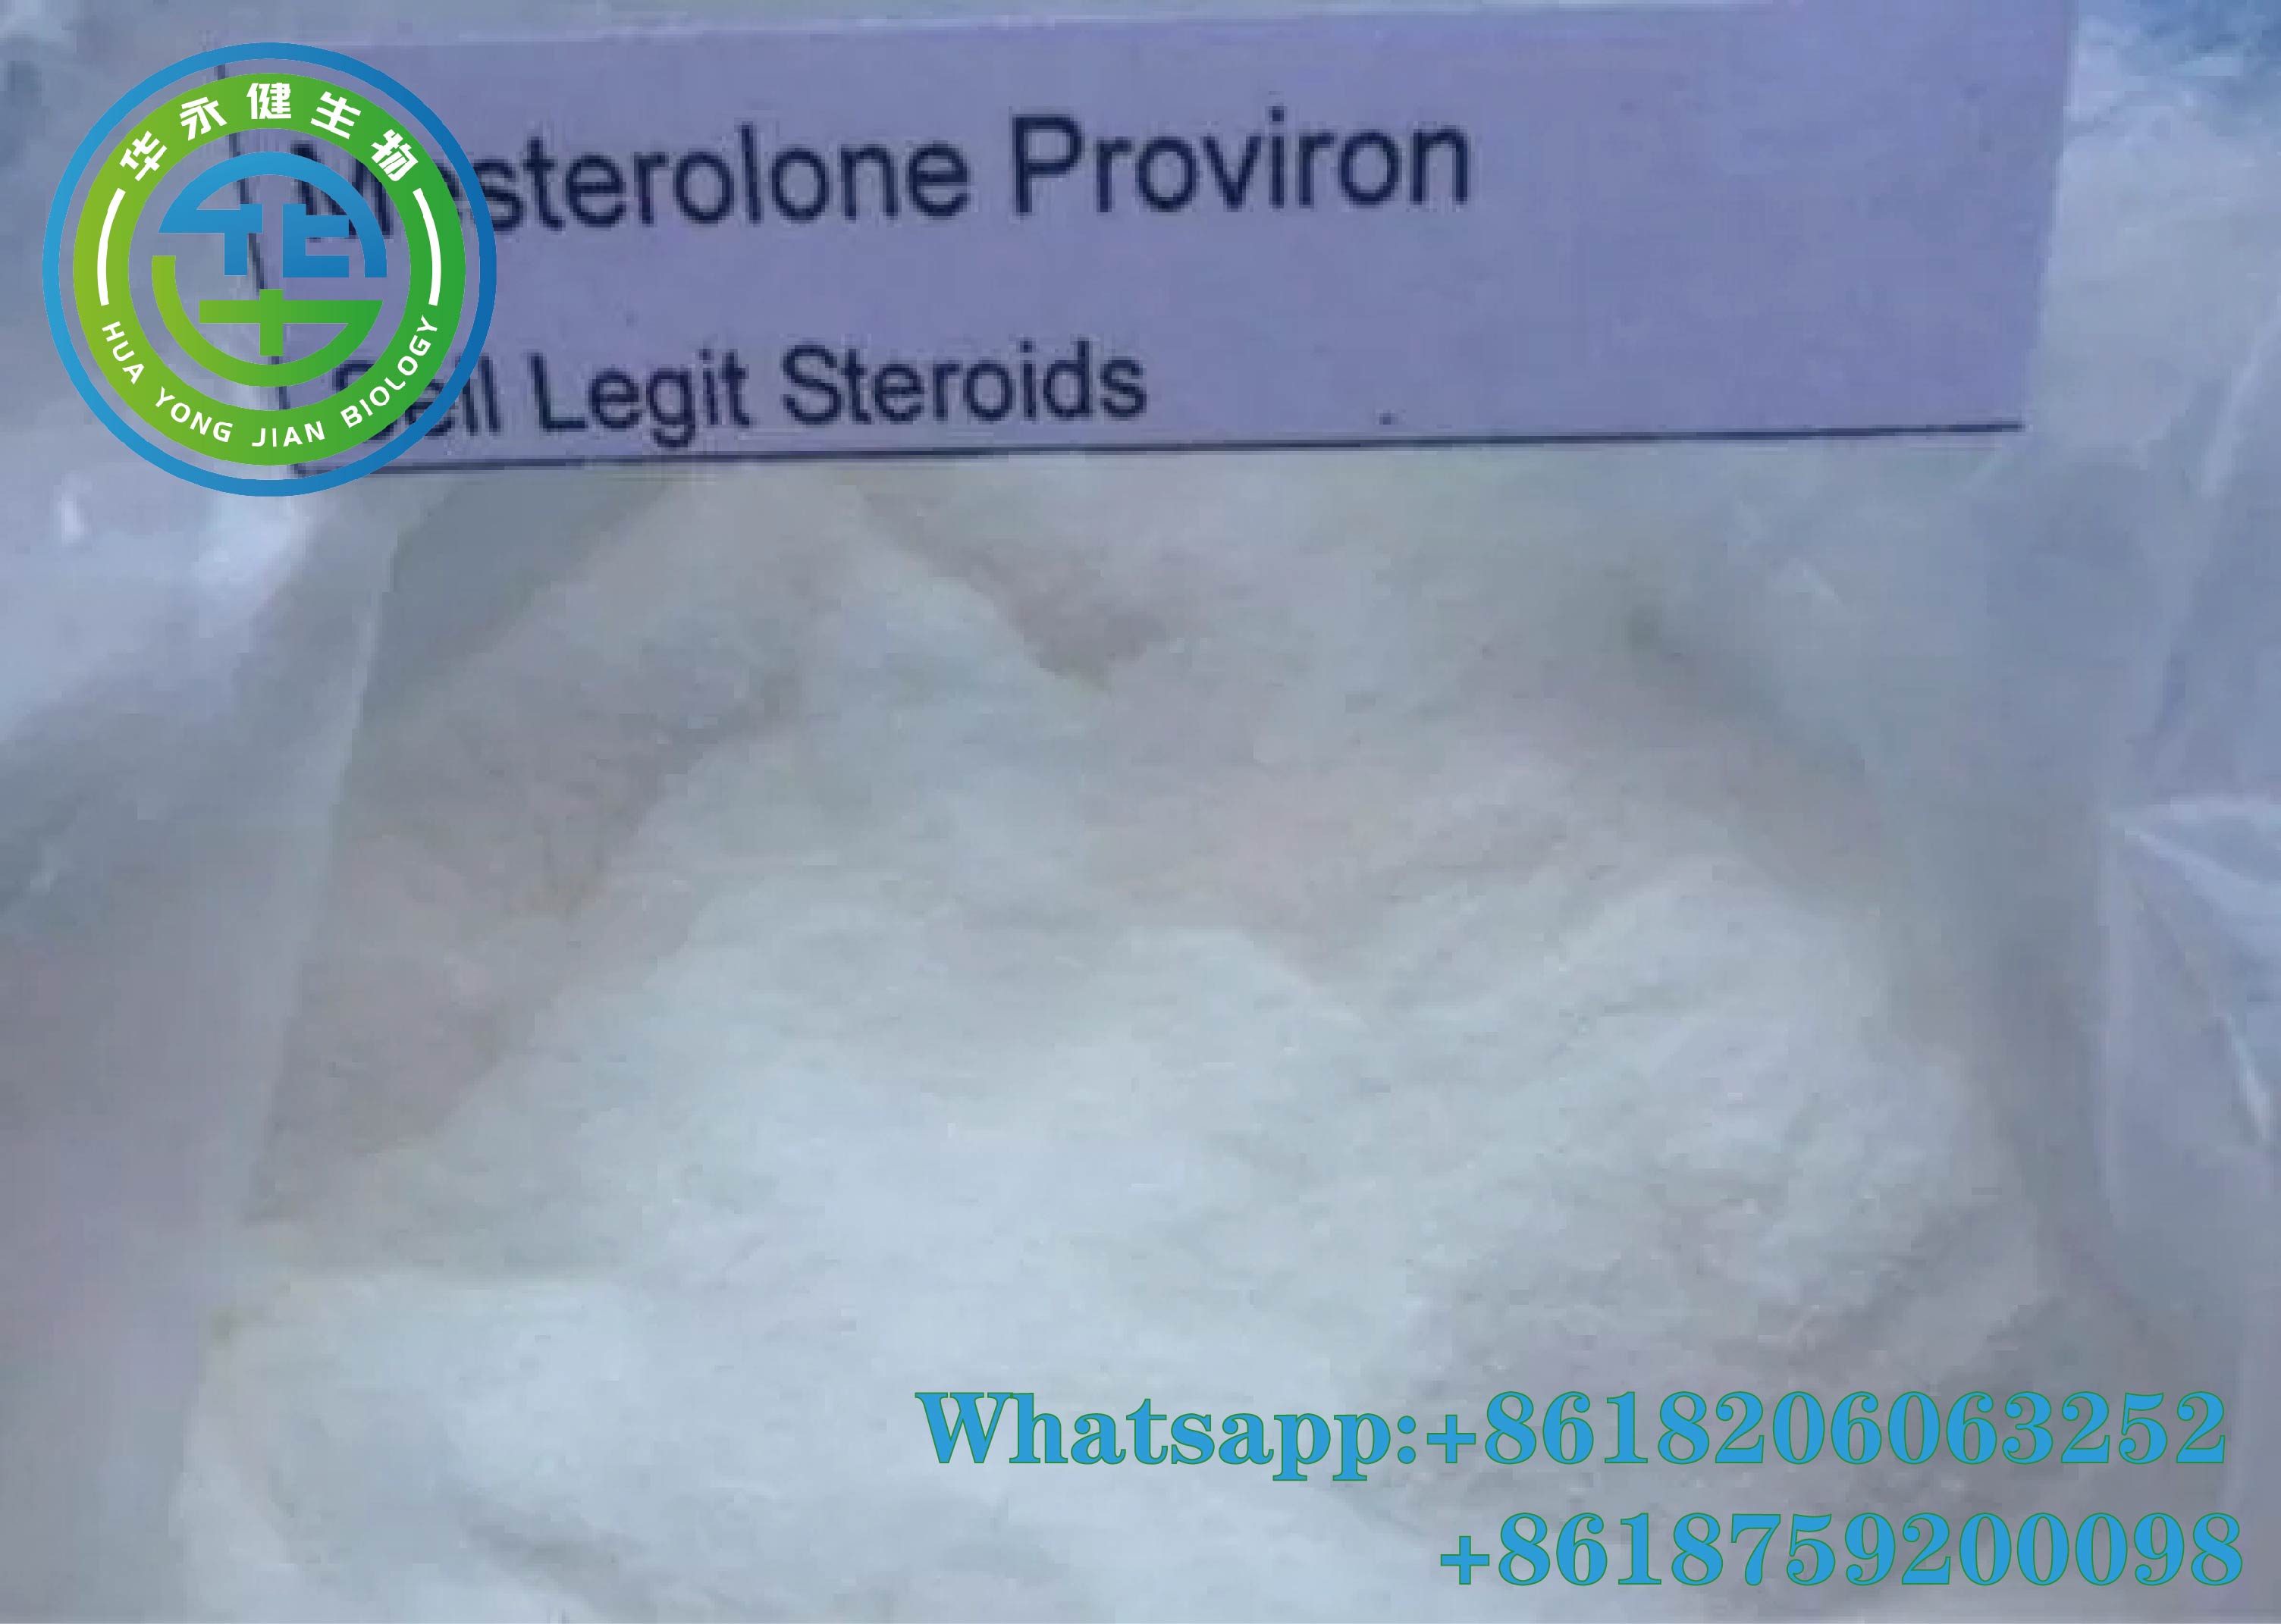 Best Quality Raw Steroids Powder for Muscle Gain Proviron Cas 1424-00-6 Chemical Raw Powder